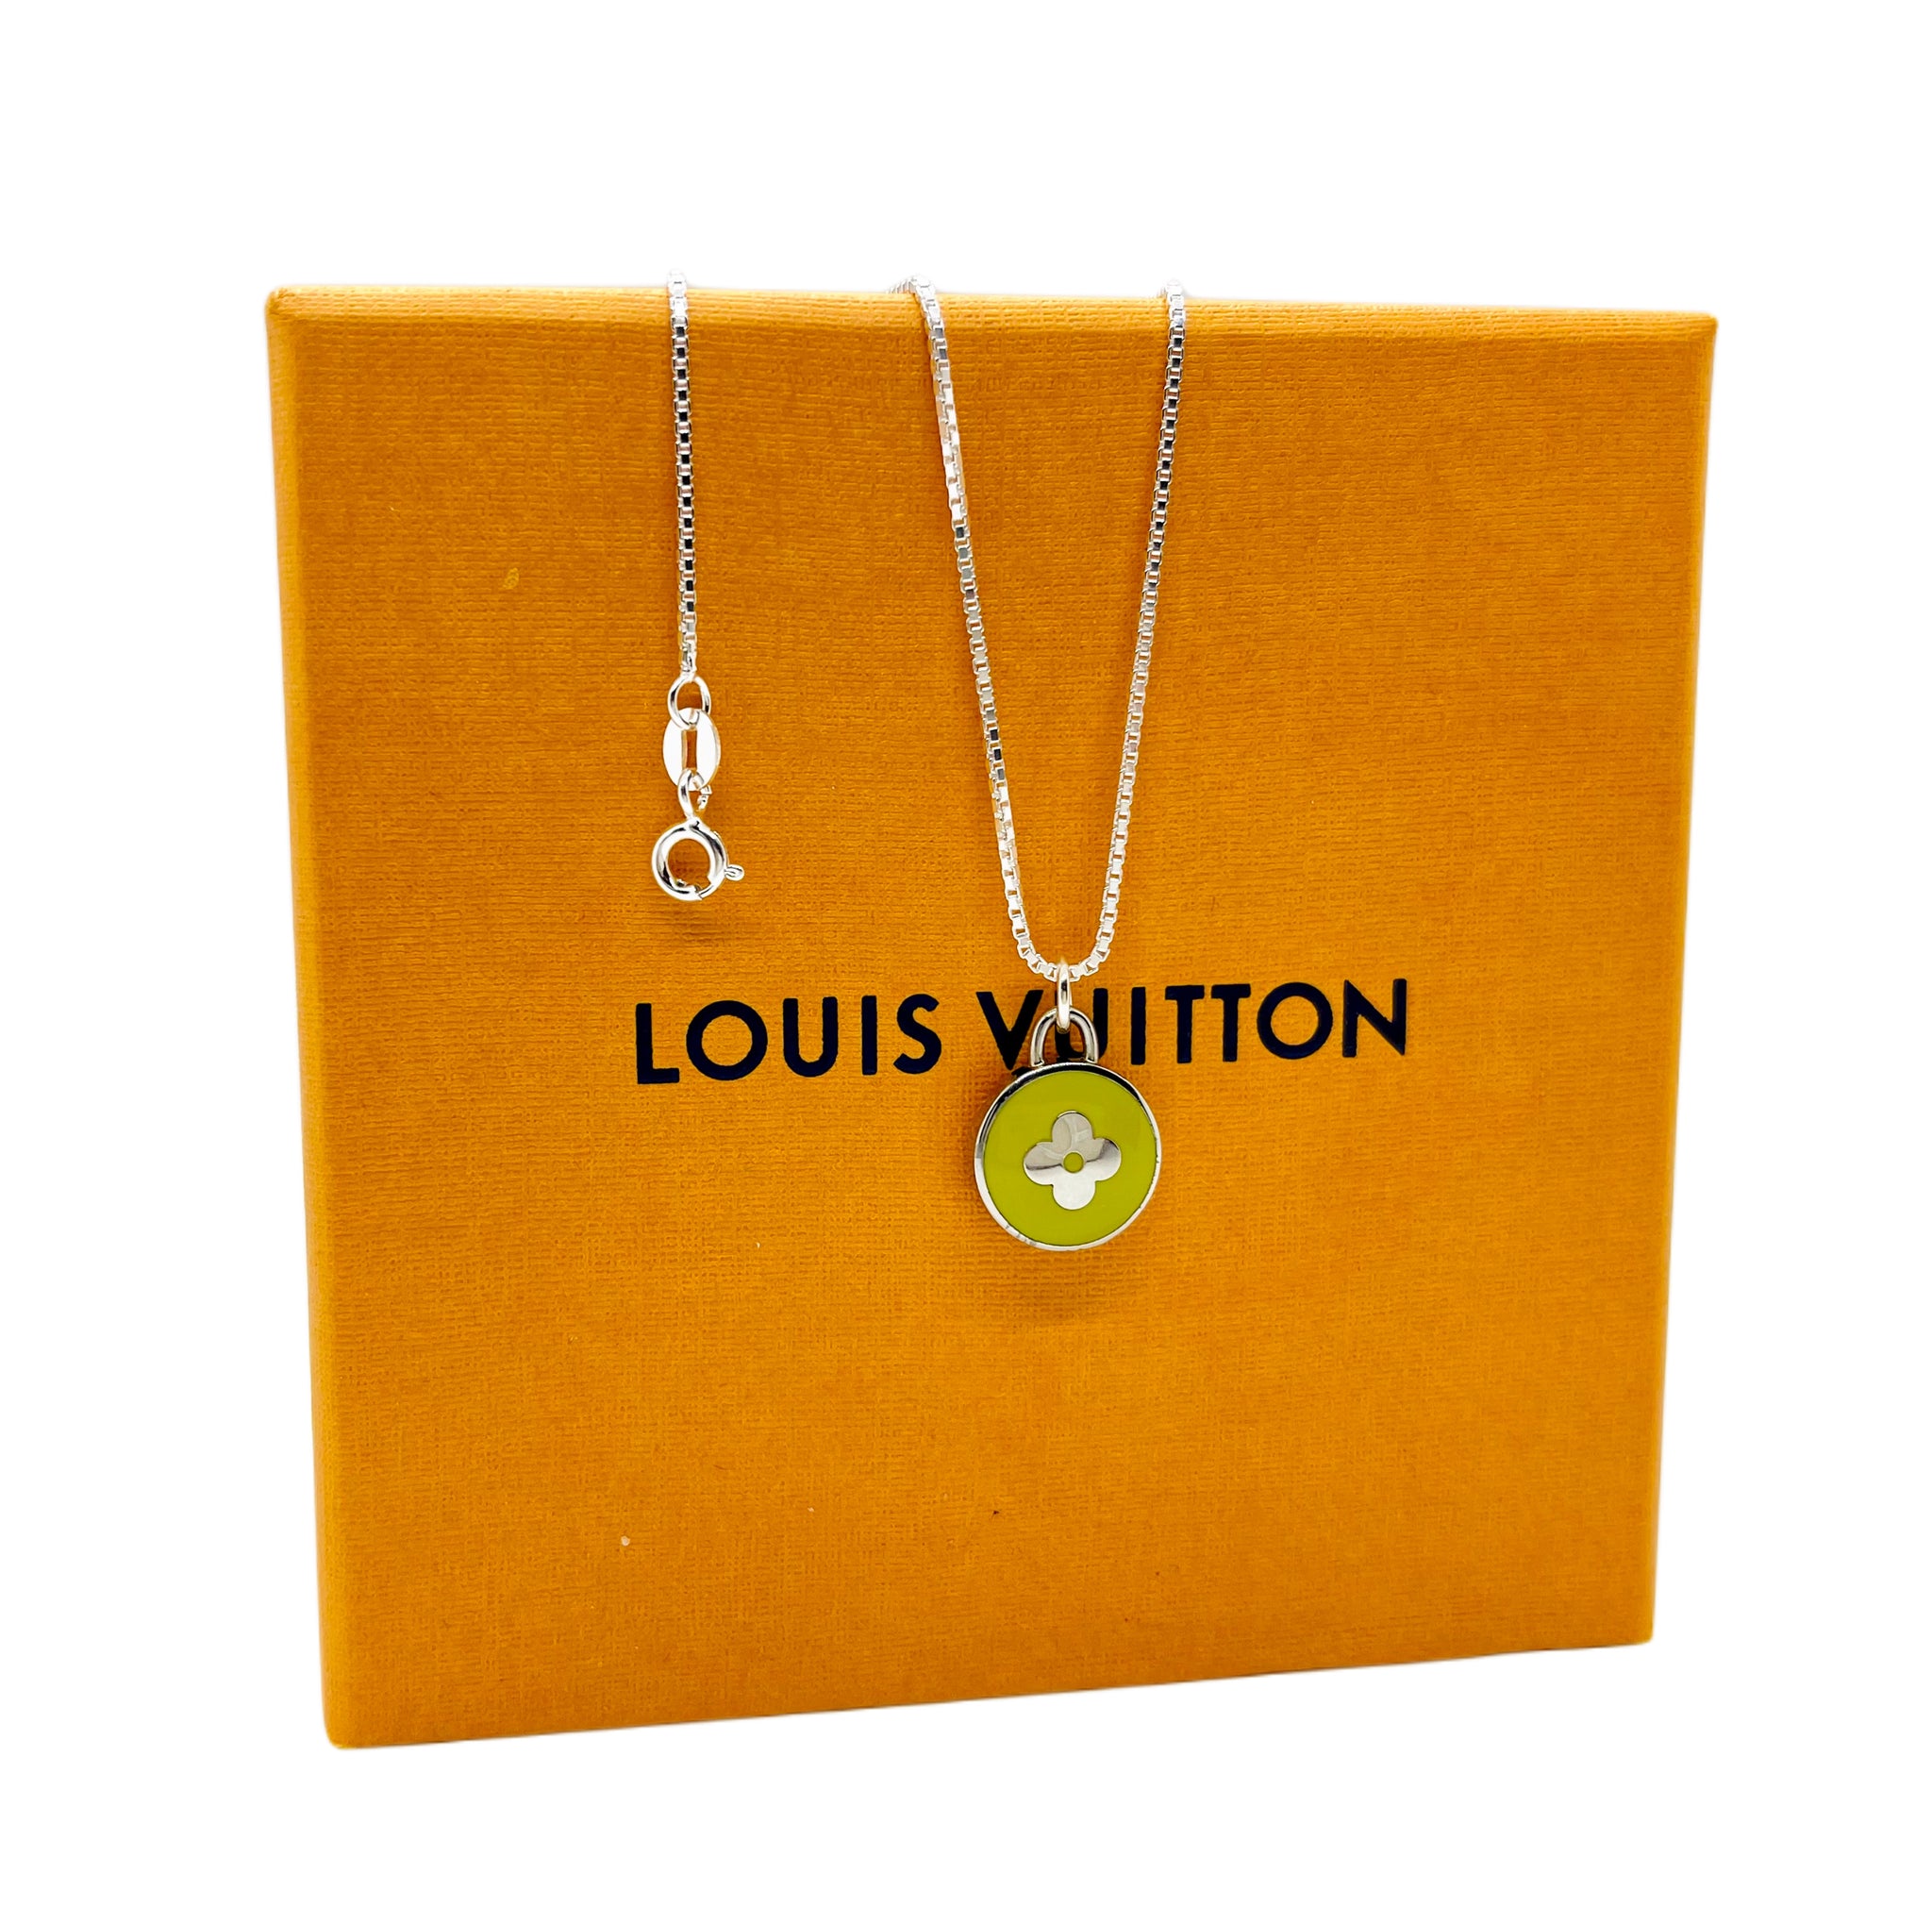 Louis Vuitton, Jewelry, New Authentic Lv Green Circle Upcycled Necklace